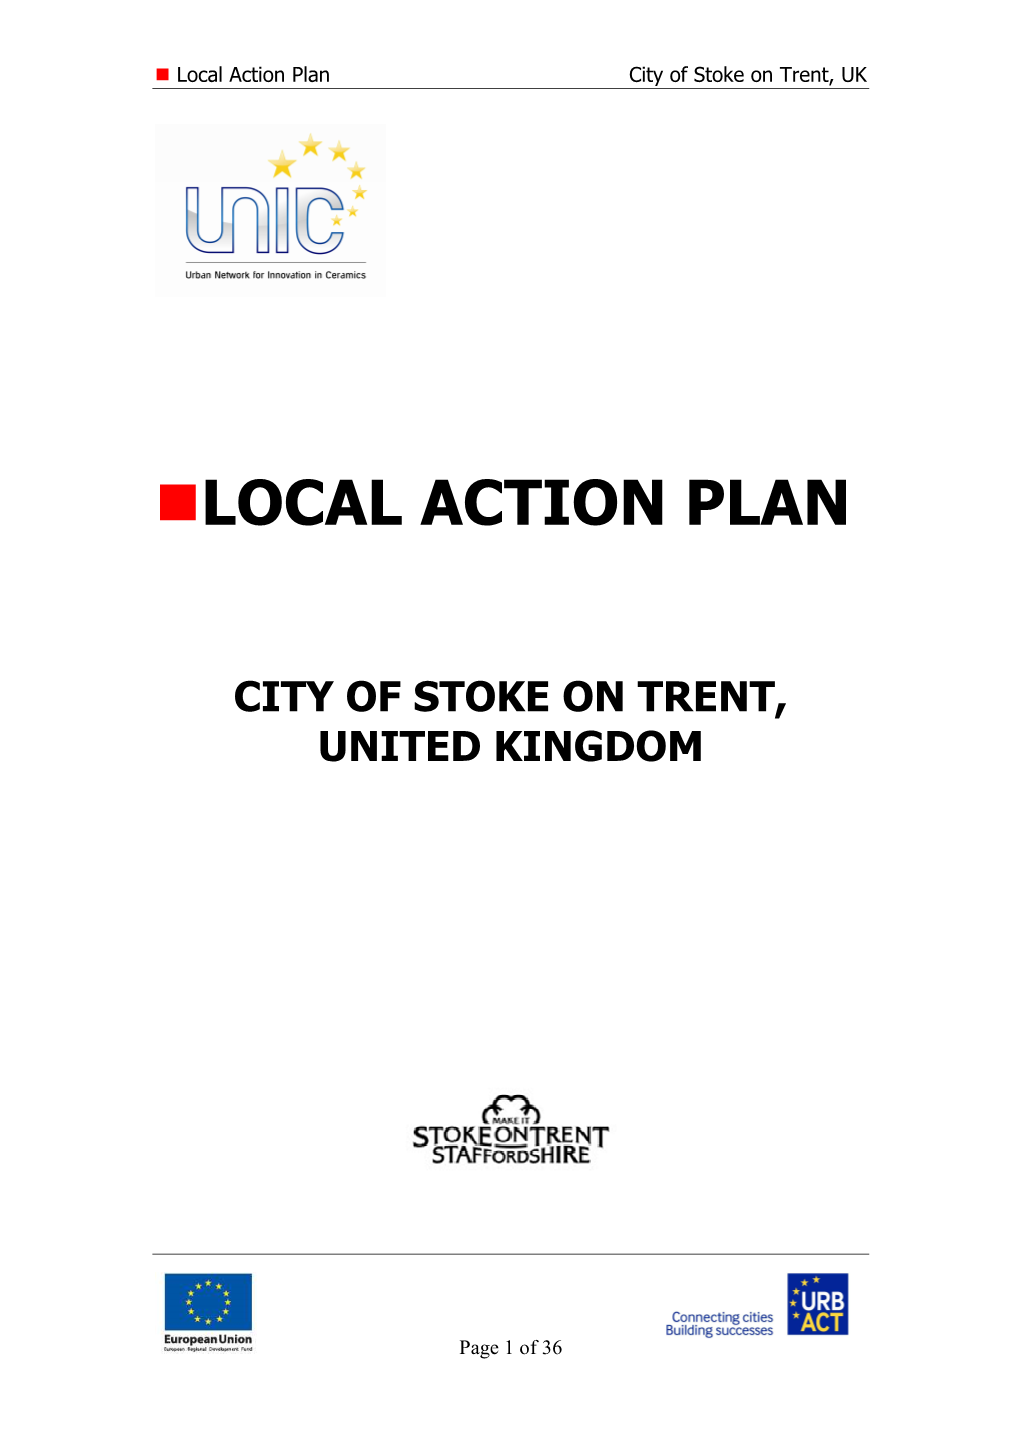 Download UNIC STOKE on TRENT Local Action Plan